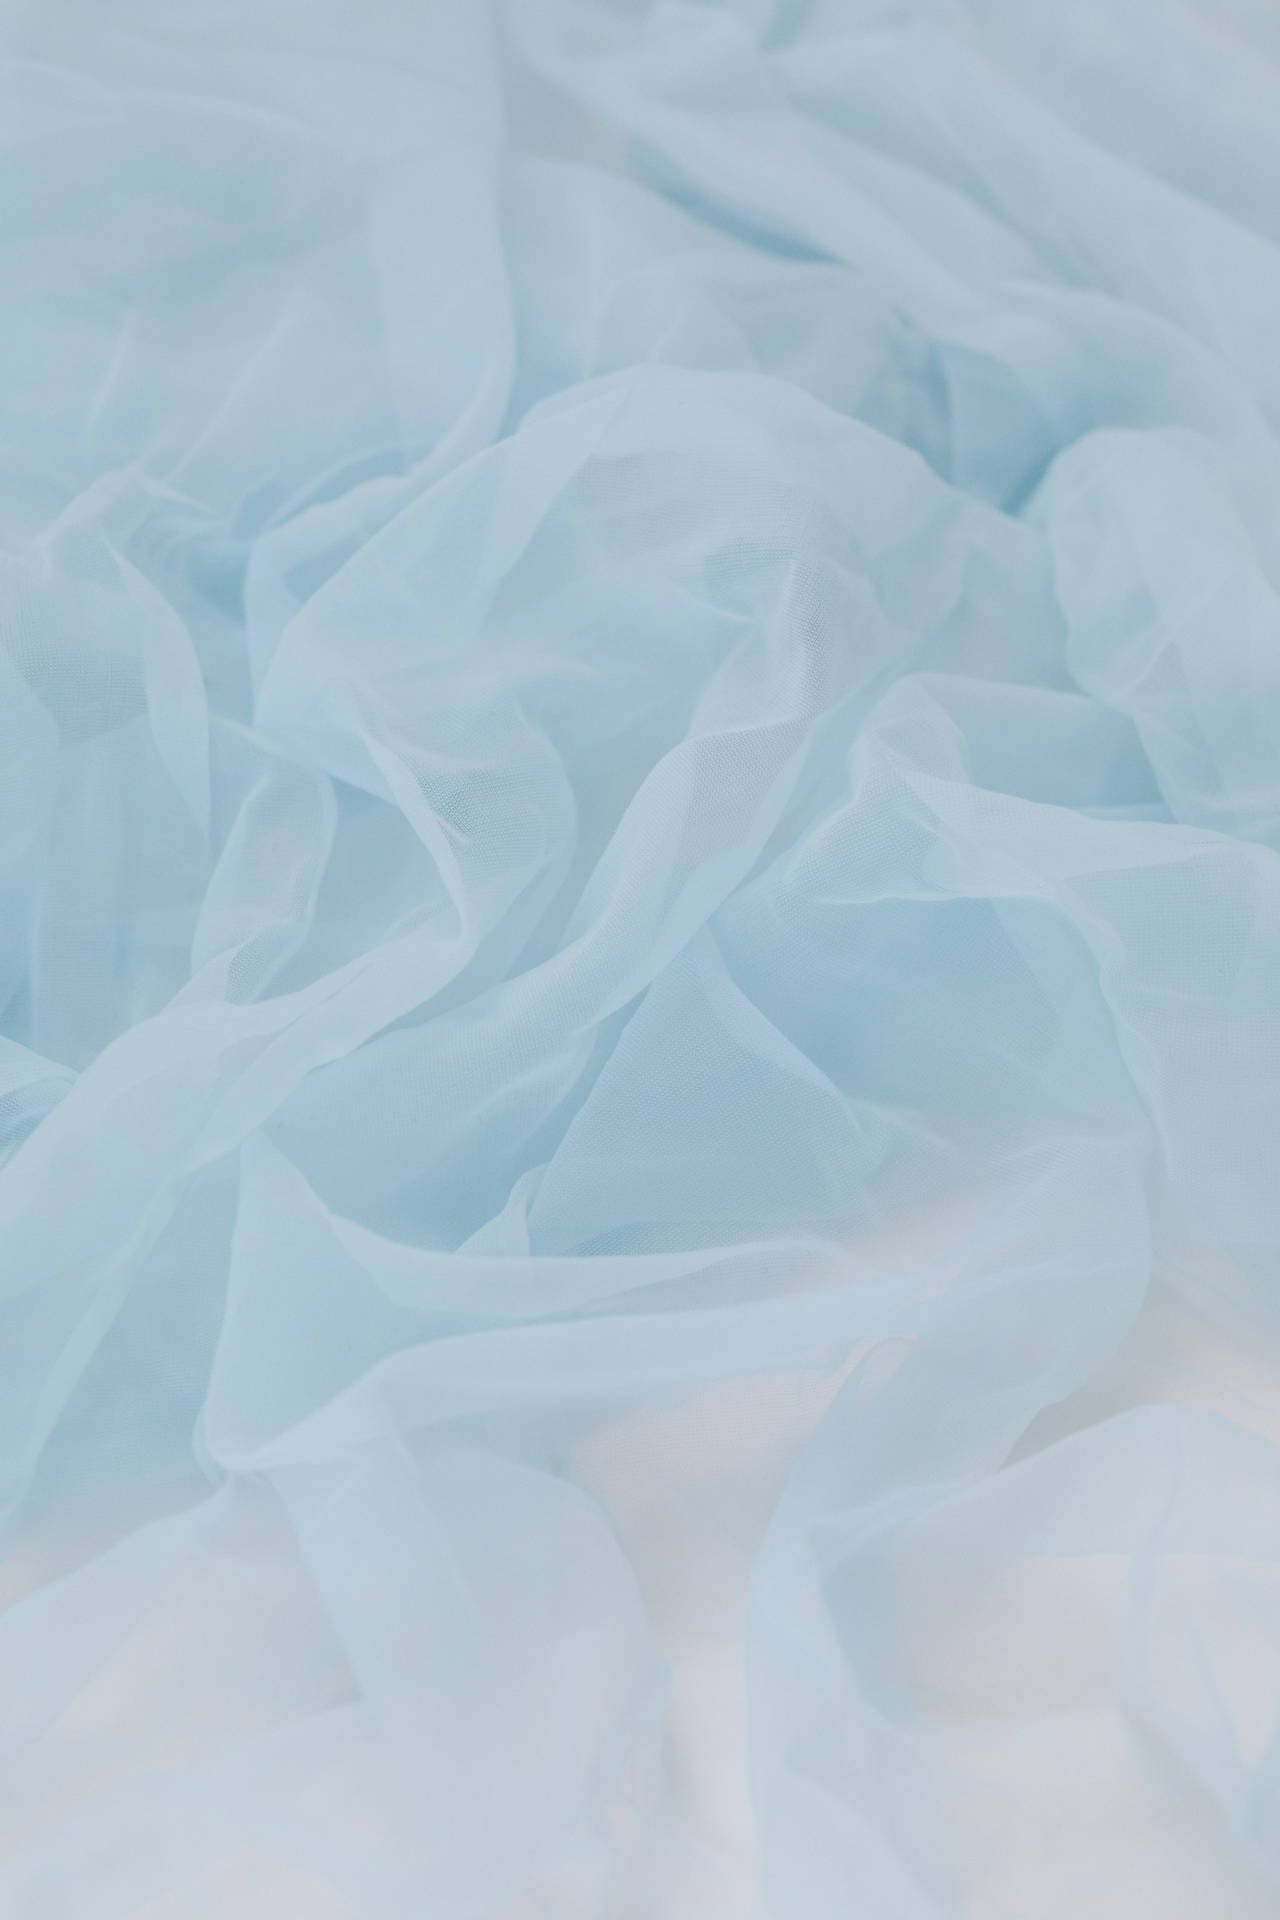 Cute Pastel Aesthetic Blue Thin Cloth Background